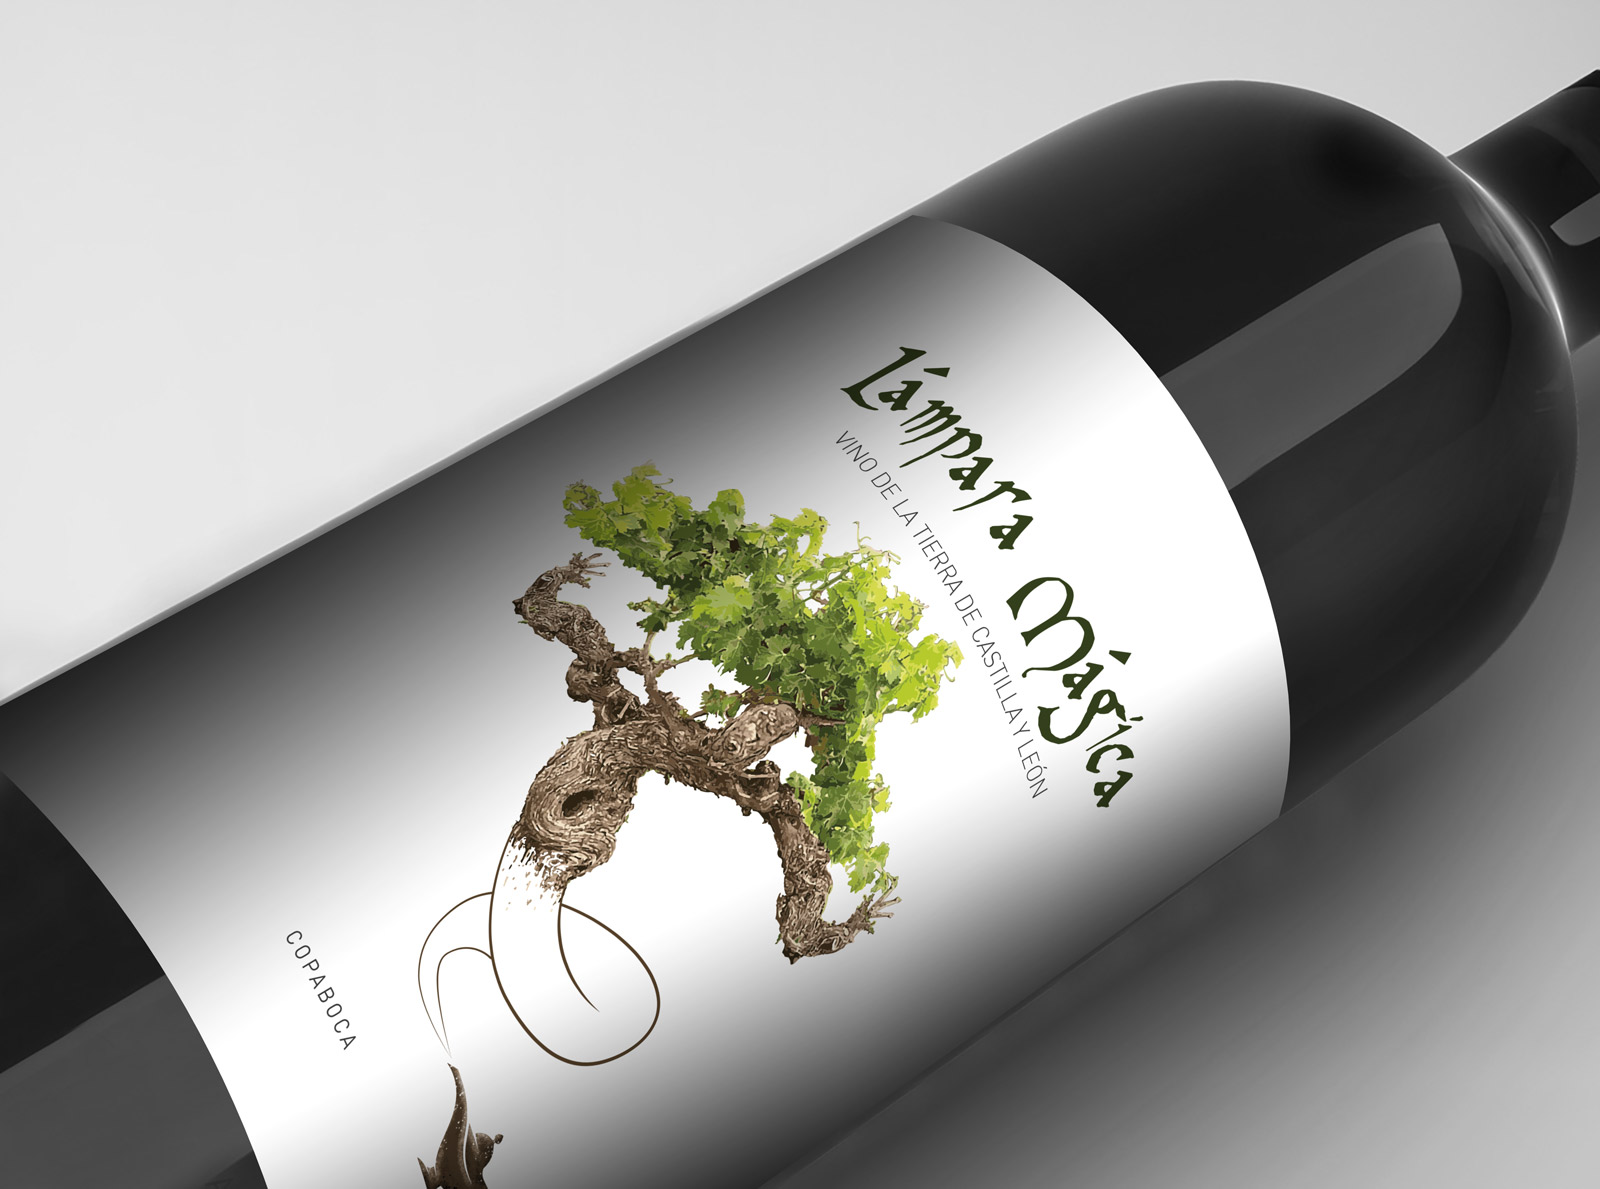 Graphic and creative design of wine labels and packaging for LÁMPARA MÁGICA